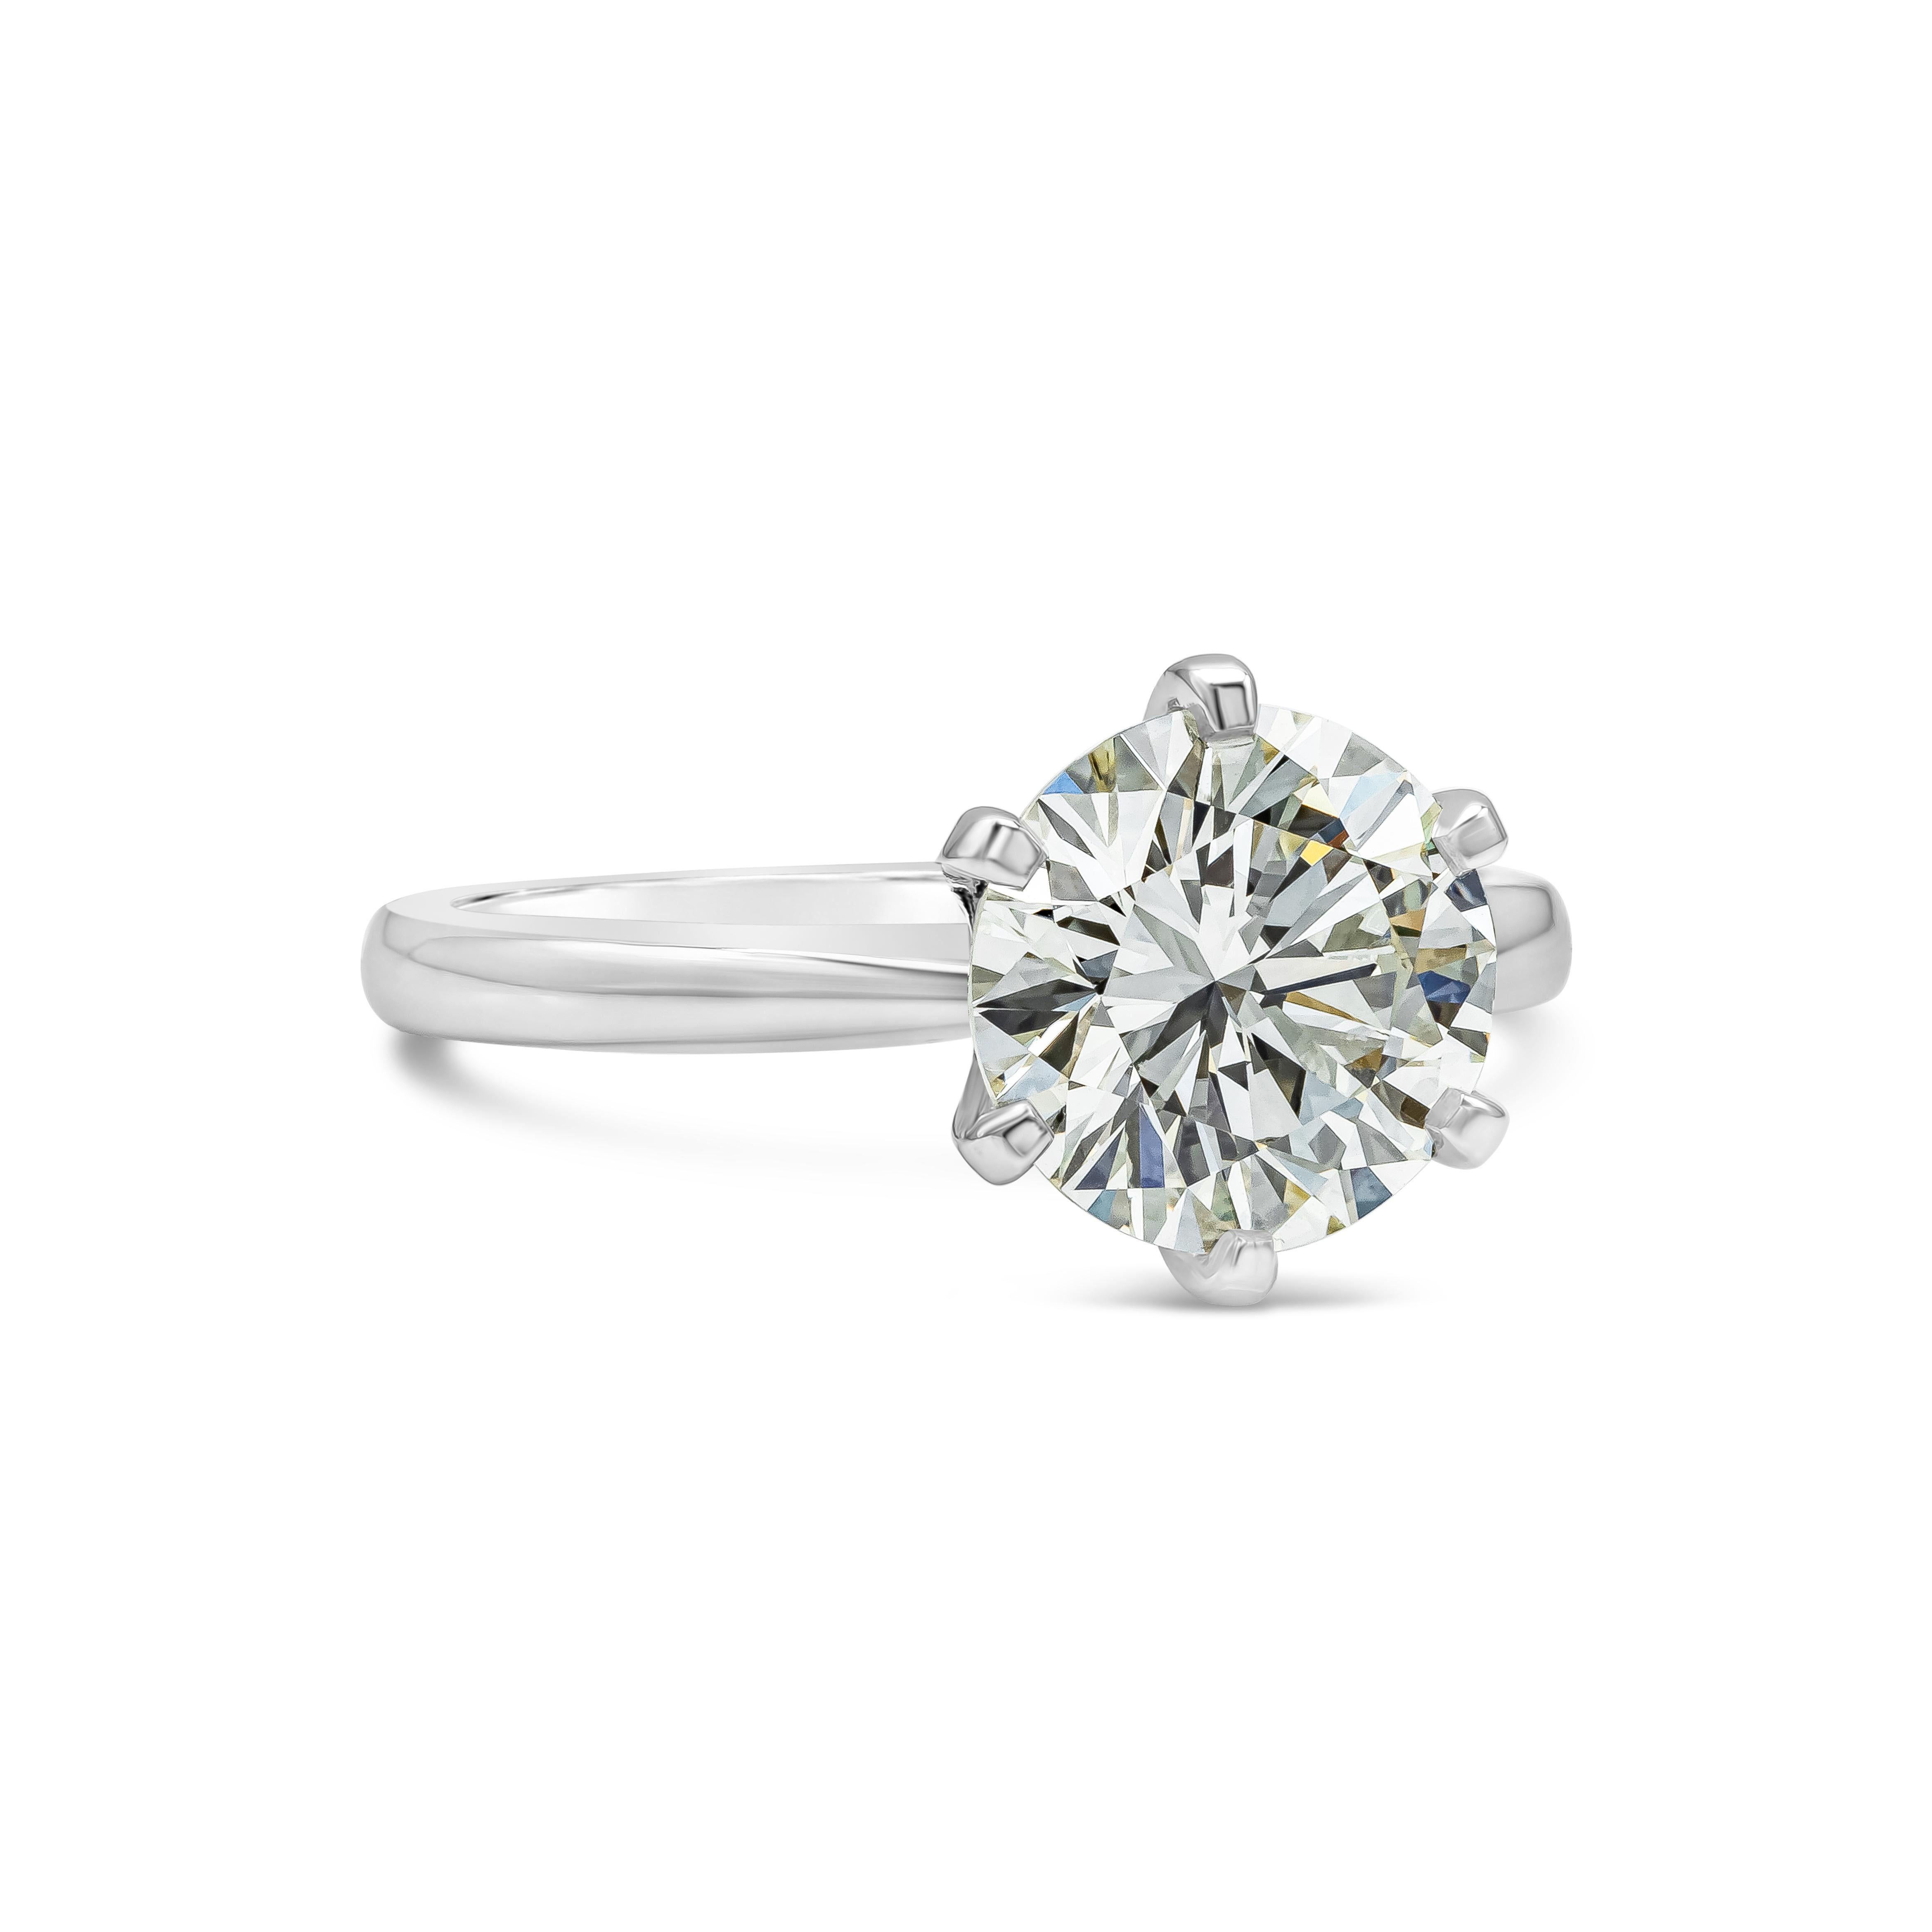 A classic engagement ring style showcasing a 2.51 carats round brilliant diamond certified by GIA as K color and VS1 in clarity, set in a traditional solitaire style mounting and made in 14k white gold. 

Roman Malakov is a custom house,